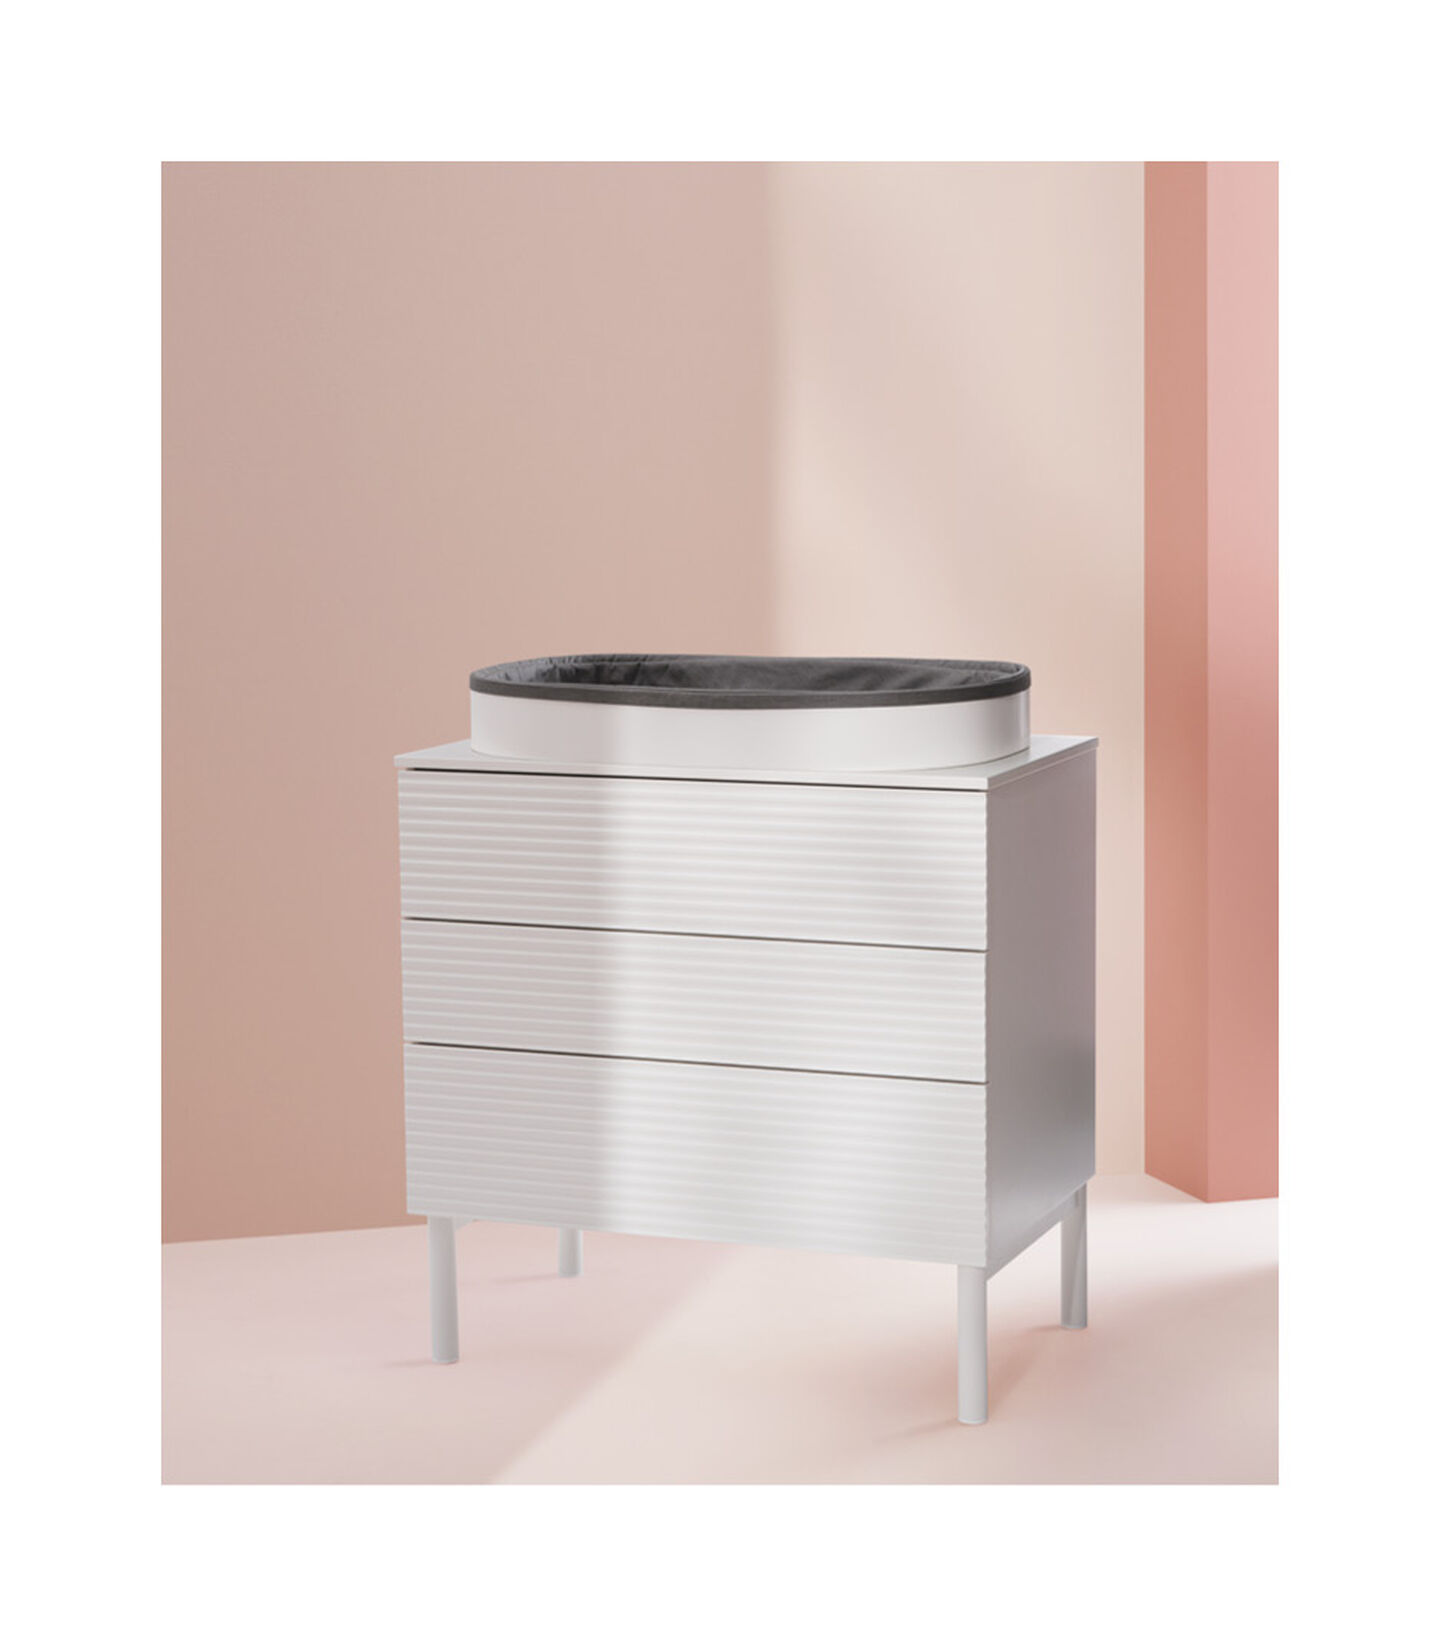 Stokke® Sleepi™ 2022, Dresser in White with Changer Top. view 4